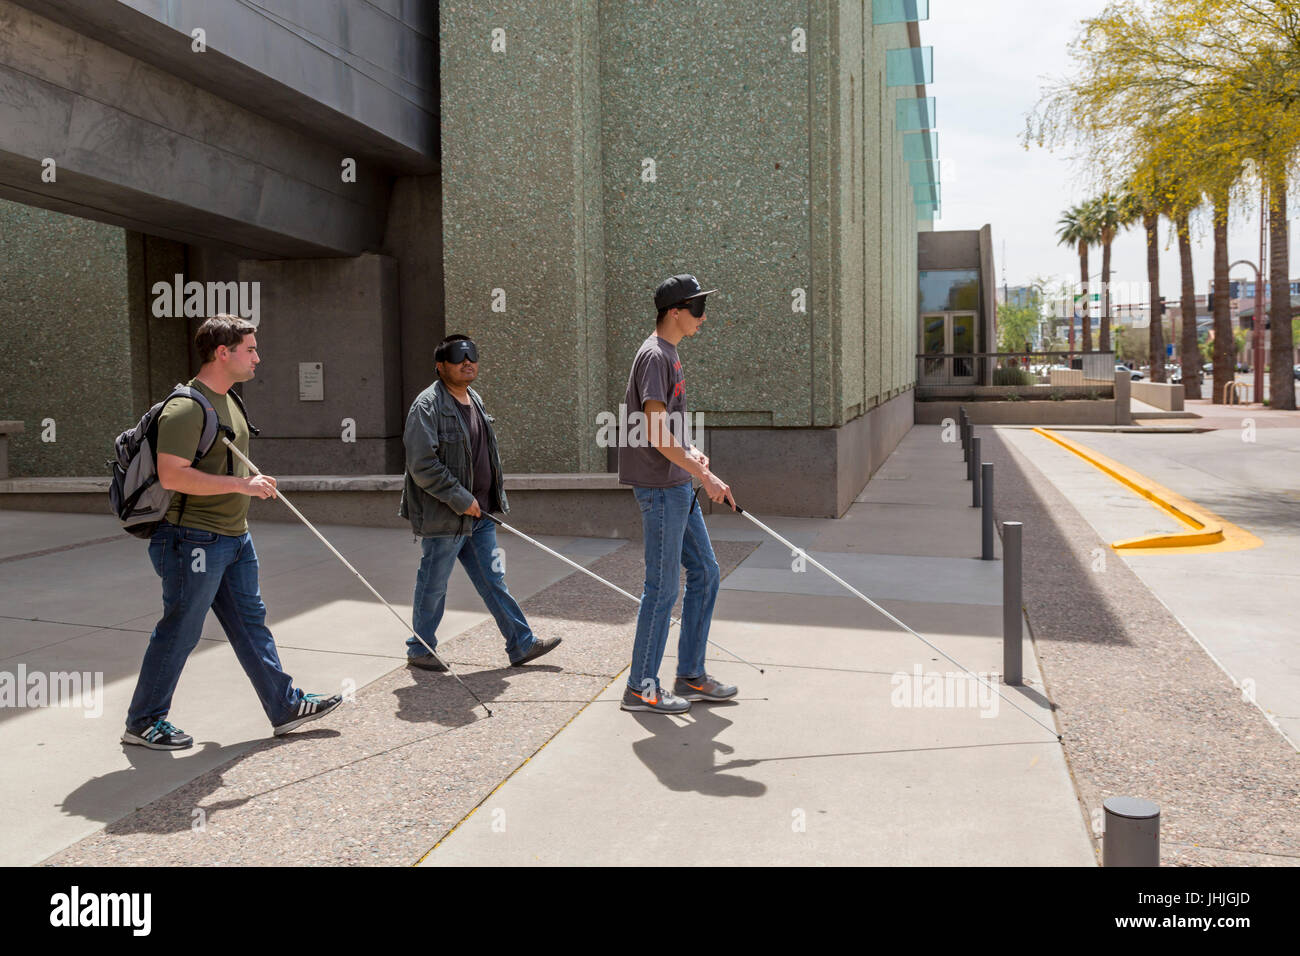 Phoenix, Arizona - Blind and visually impaired young men, some wearing sleep masks, practice navigating city streets with white canes. Stock Photo